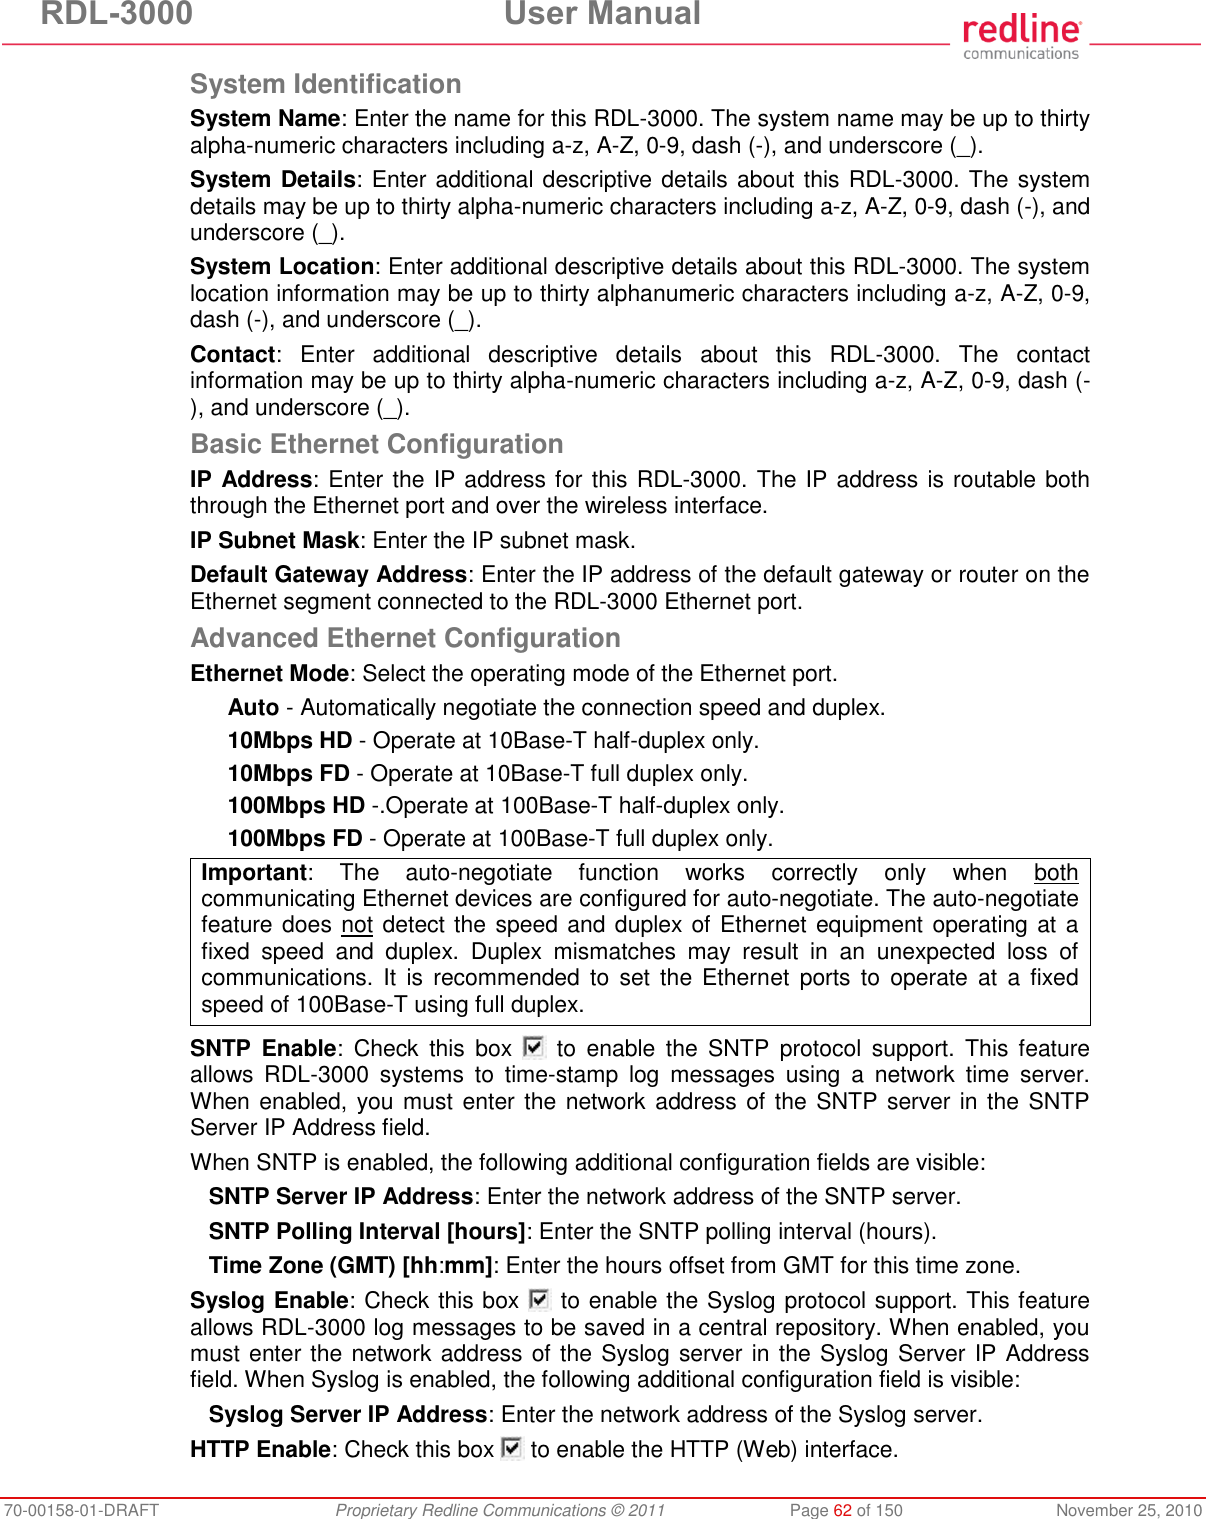 RDL-3000  User Manual 70-00158-01-DRAFT  Proprietary Redline Communications © 2011  Page 62 of 150  November 25, 2010 System Identification System Name: Enter the name for this RDL-3000. The system name may be up to thirty alpha-numeric characters including a-z, A-Z, 0-9, dash (-), and underscore (_). System Details: Enter additional descriptive details about this RDL-3000. The system details may be up to thirty alpha-numeric characters including a-z, A-Z, 0-9, dash (-), and underscore (_). System Location: Enter additional descriptive details about this RDL-3000. The system location information may be up to thirty alphanumeric characters including a-z, A-Z, 0-9, dash (-), and underscore (_). Contact:  Enter  additional  descriptive  details  about  this  RDL-3000.  The  contact information may be up to thirty alpha-numeric characters including a-z, A-Z, 0-9, dash (-), and underscore (_). Basic Ethernet Configuration IP Address: Enter the IP address for this RDL-3000. The IP address is routable both through the Ethernet port and over the wireless interface. IP Subnet Mask: Enter the IP subnet mask. Default Gateway Address: Enter the IP address of the default gateway or router on the Ethernet segment connected to the RDL-3000 Ethernet port. Advanced Ethernet Configuration Ethernet Mode: Select the operating mode of the Ethernet port. Auto - Automatically negotiate the connection speed and duplex. 10Mbps HD - Operate at 10Base-T half-duplex only. 10Mbps FD - Operate at 10Base-T full duplex only. 100Mbps HD -.Operate at 100Base-T half-duplex only. 100Mbps FD - Operate at 100Base-T full duplex only. Important:  The  auto-negotiate  function  works  correctly  only  when  both communicating Ethernet devices are configured for auto-negotiate. The auto-negotiate feature does not detect the speed and duplex of Ethernet equipment operating at a fixed  speed  and  duplex.  Duplex  mismatches  may  result  in  an  unexpected  loss  of communications. It  is  recommended  to  set  the Ethernet  ports to  operate  at  a  fixed speed of 100Base-T using full duplex.  SNTP  Enable:  Check  this  box    to  enable  the  SNTP  protocol  support.  This  feature allows  RDL-3000  systems  to  time-stamp  log  messages  using  a  network  time  server. When enabled, you must  enter the network address of the SNTP server in the SNTP Server IP Address field. When SNTP is enabled, the following additional configuration fields are visible: SNTP Server IP Address: Enter the network address of the SNTP server. SNTP Polling Interval [hours]: Enter the SNTP polling interval (hours). Time Zone (GMT) [hh:mm]: Enter the hours offset from GMT for this time zone. Syslog Enable: Check this box   to enable the Syslog protocol support. This feature allows RDL-3000 log messages to be saved in a central repository. When enabled, you must enter the network address of the Syslog server in the Syslog Server IP Address field. When Syslog is enabled, the following additional configuration field is visible: Syslog Server IP Address: Enter the network address of the Syslog server. HTTP Enable: Check this box   to enable the HTTP (Web) interface. 